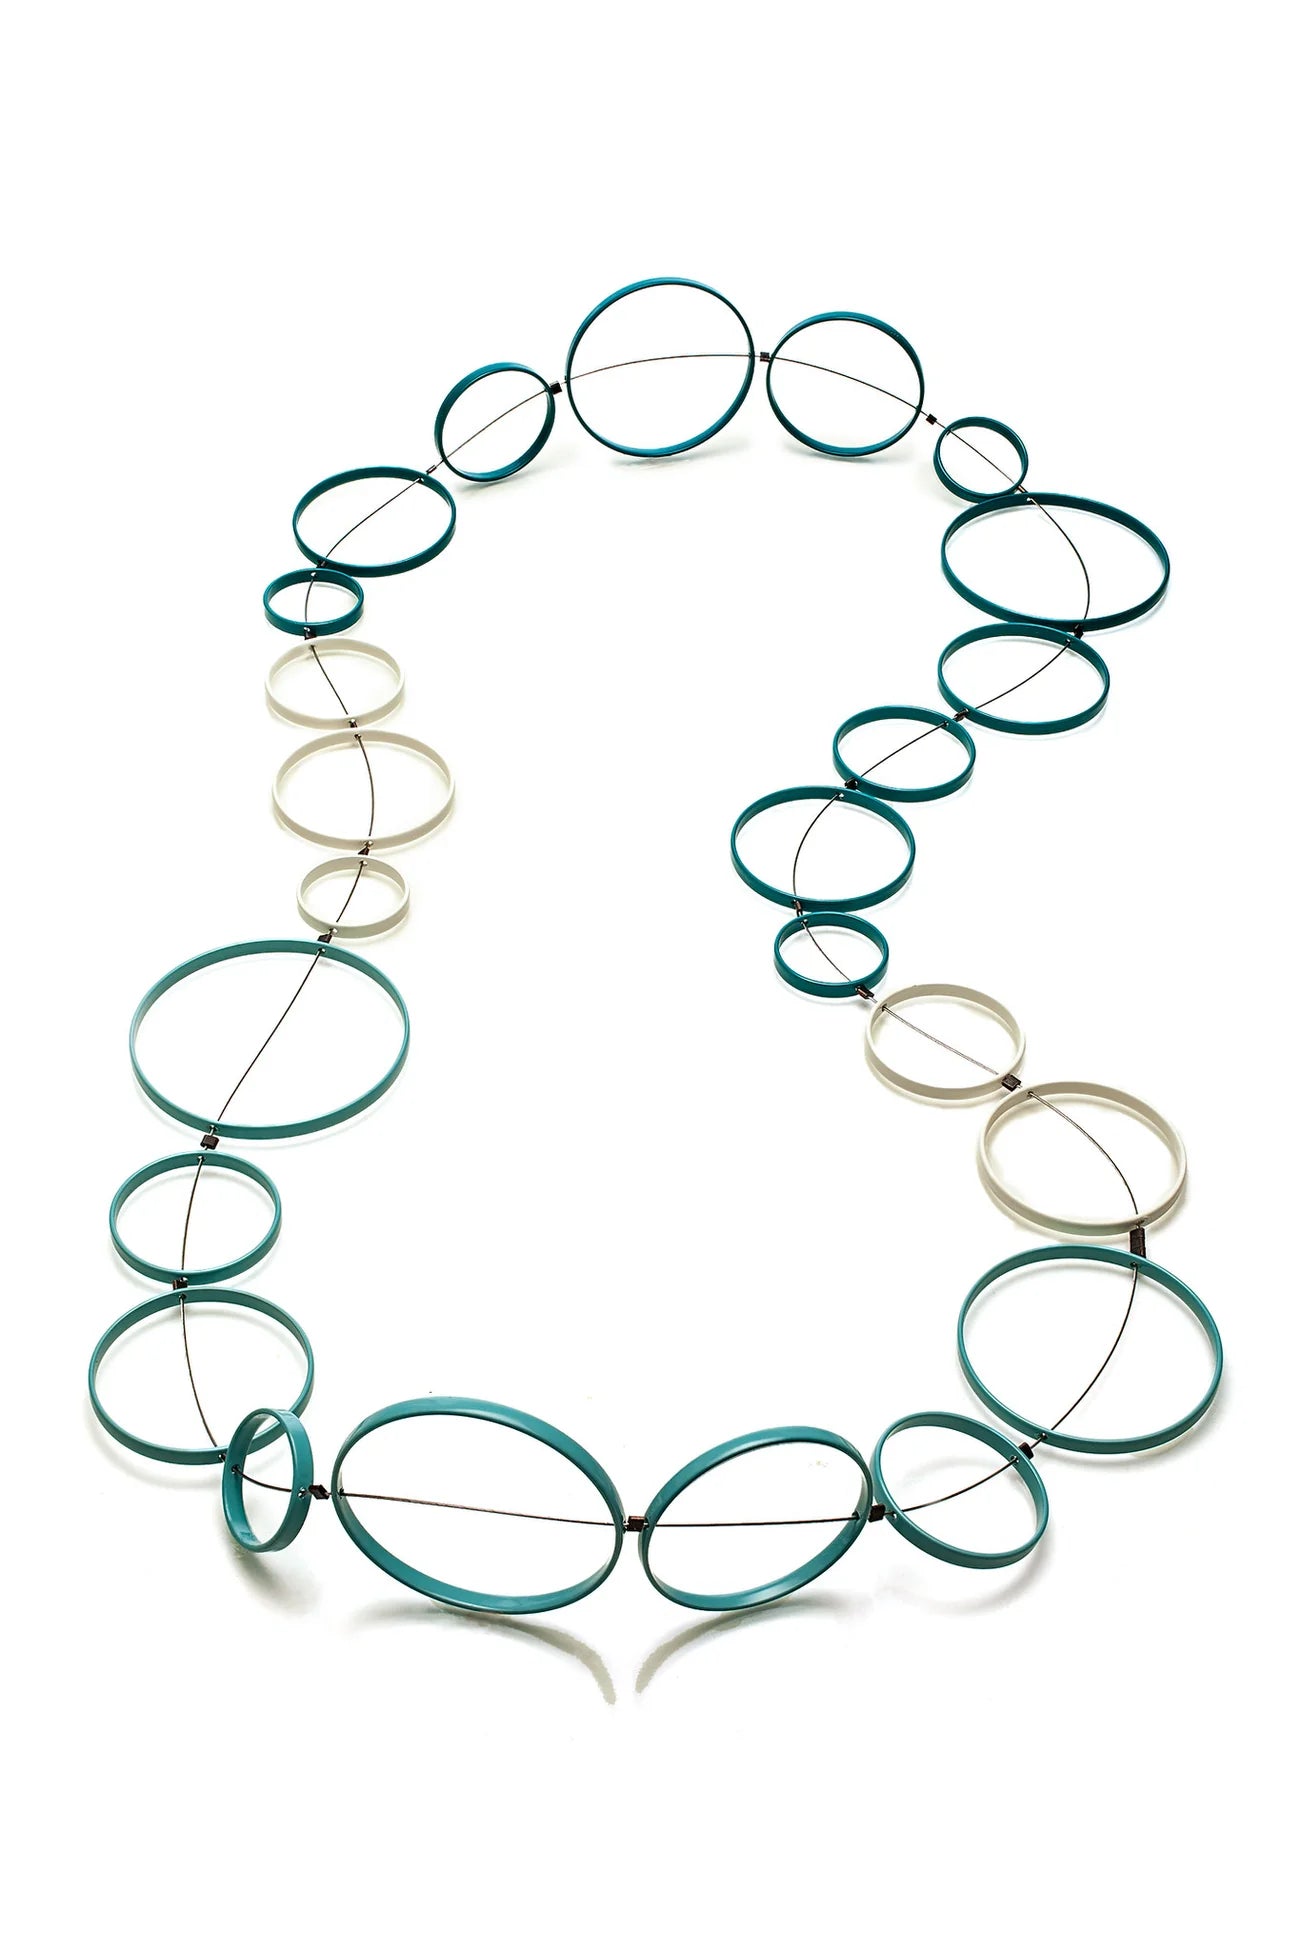 necklace with interlocking circles